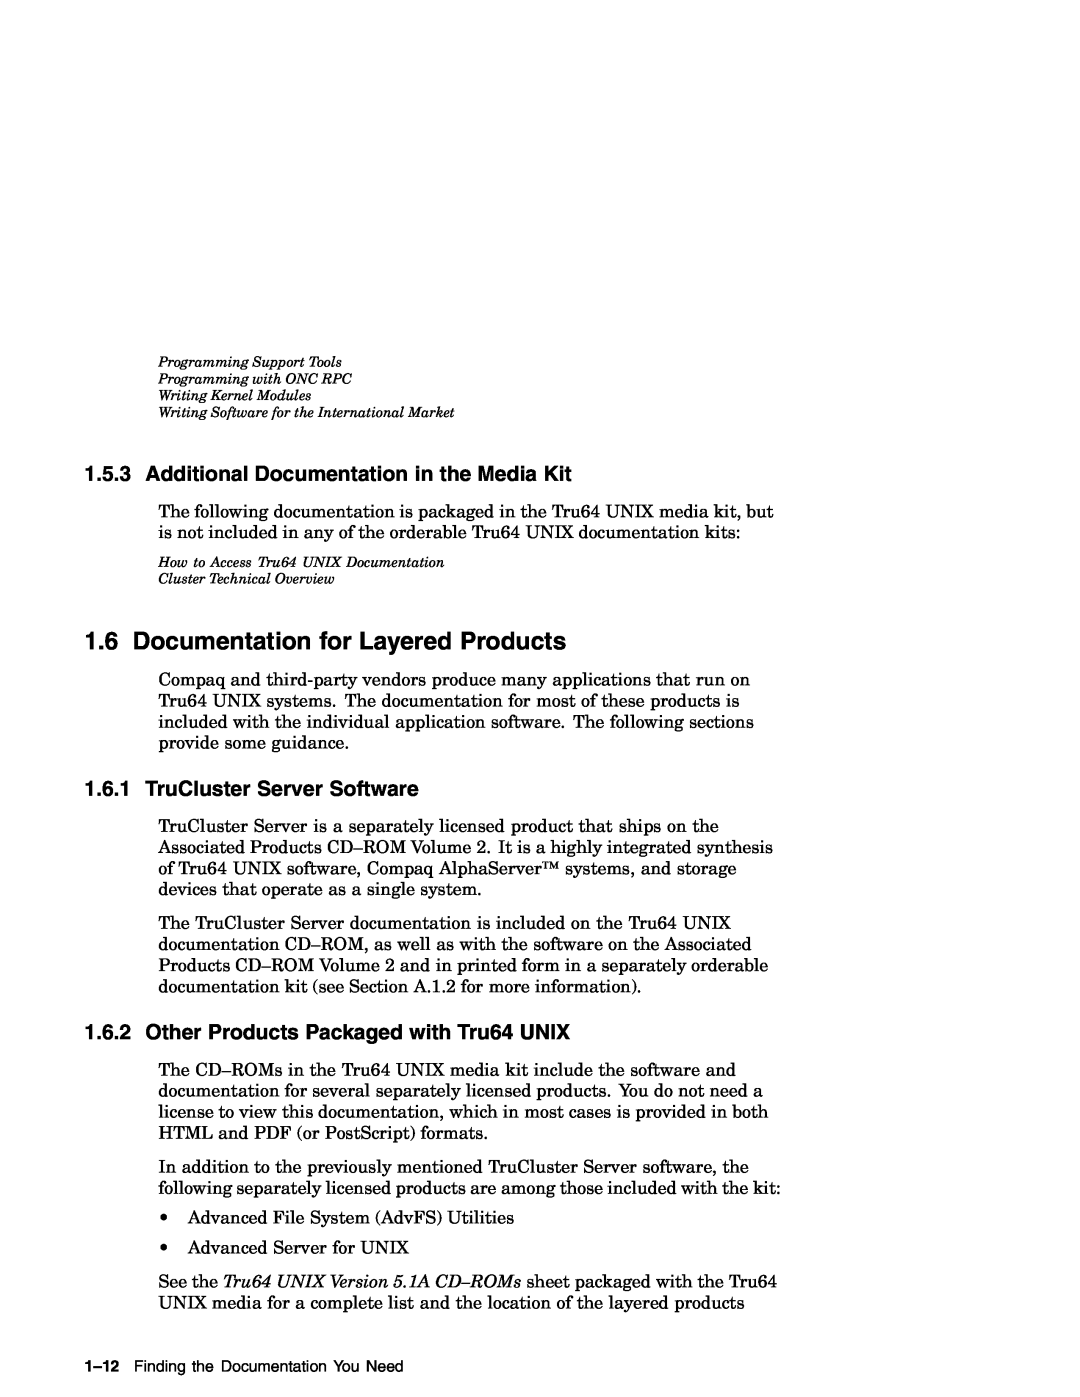 Compaq AA-RH8RD-TE manual Documentation for Layered Products, Additional Documentation in the Media Kit 